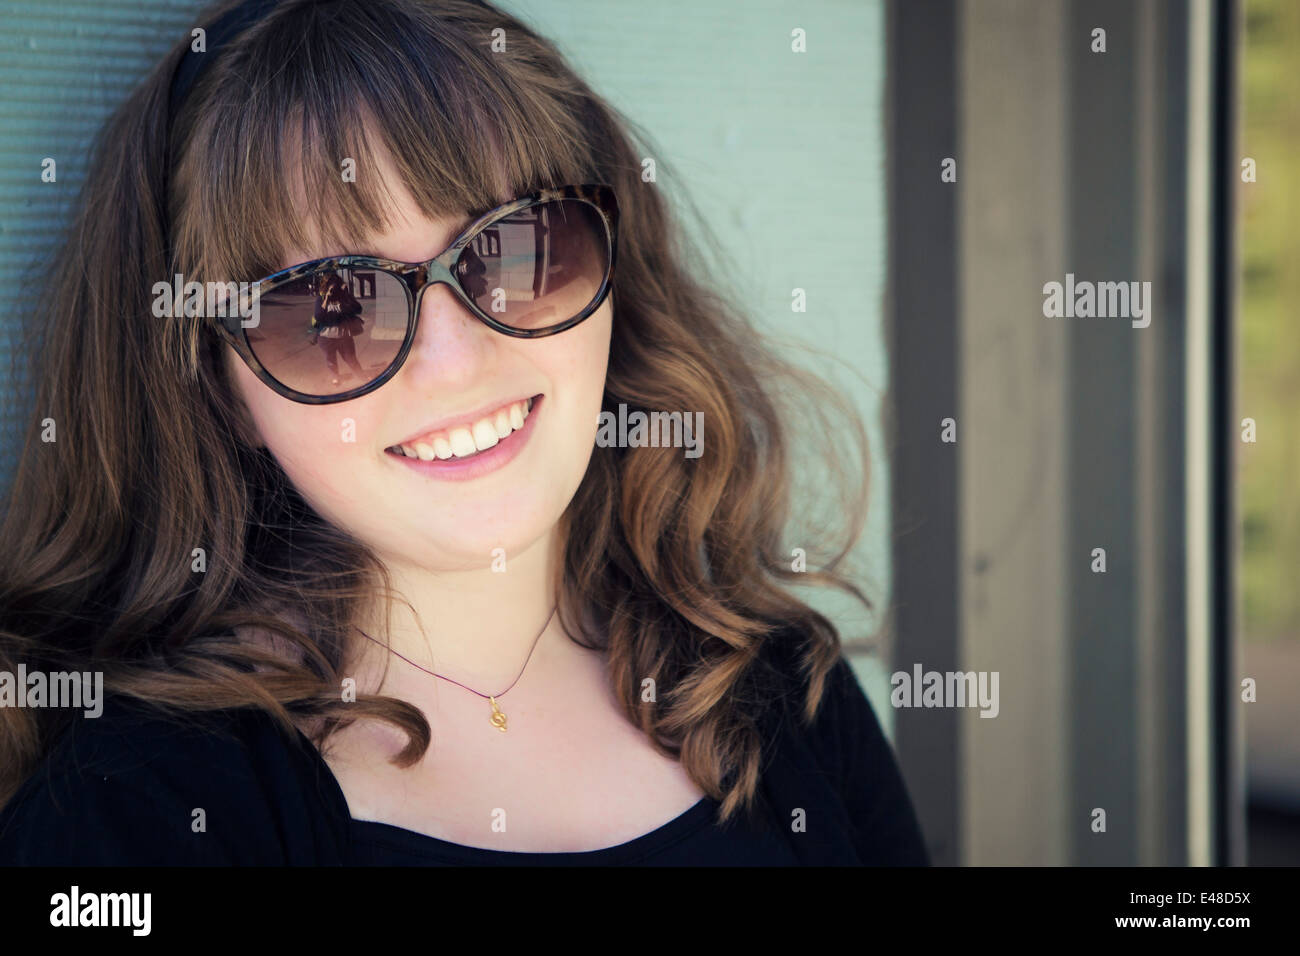 Portrait of smiling girl (13-15) in sunglasses Banque D'Images